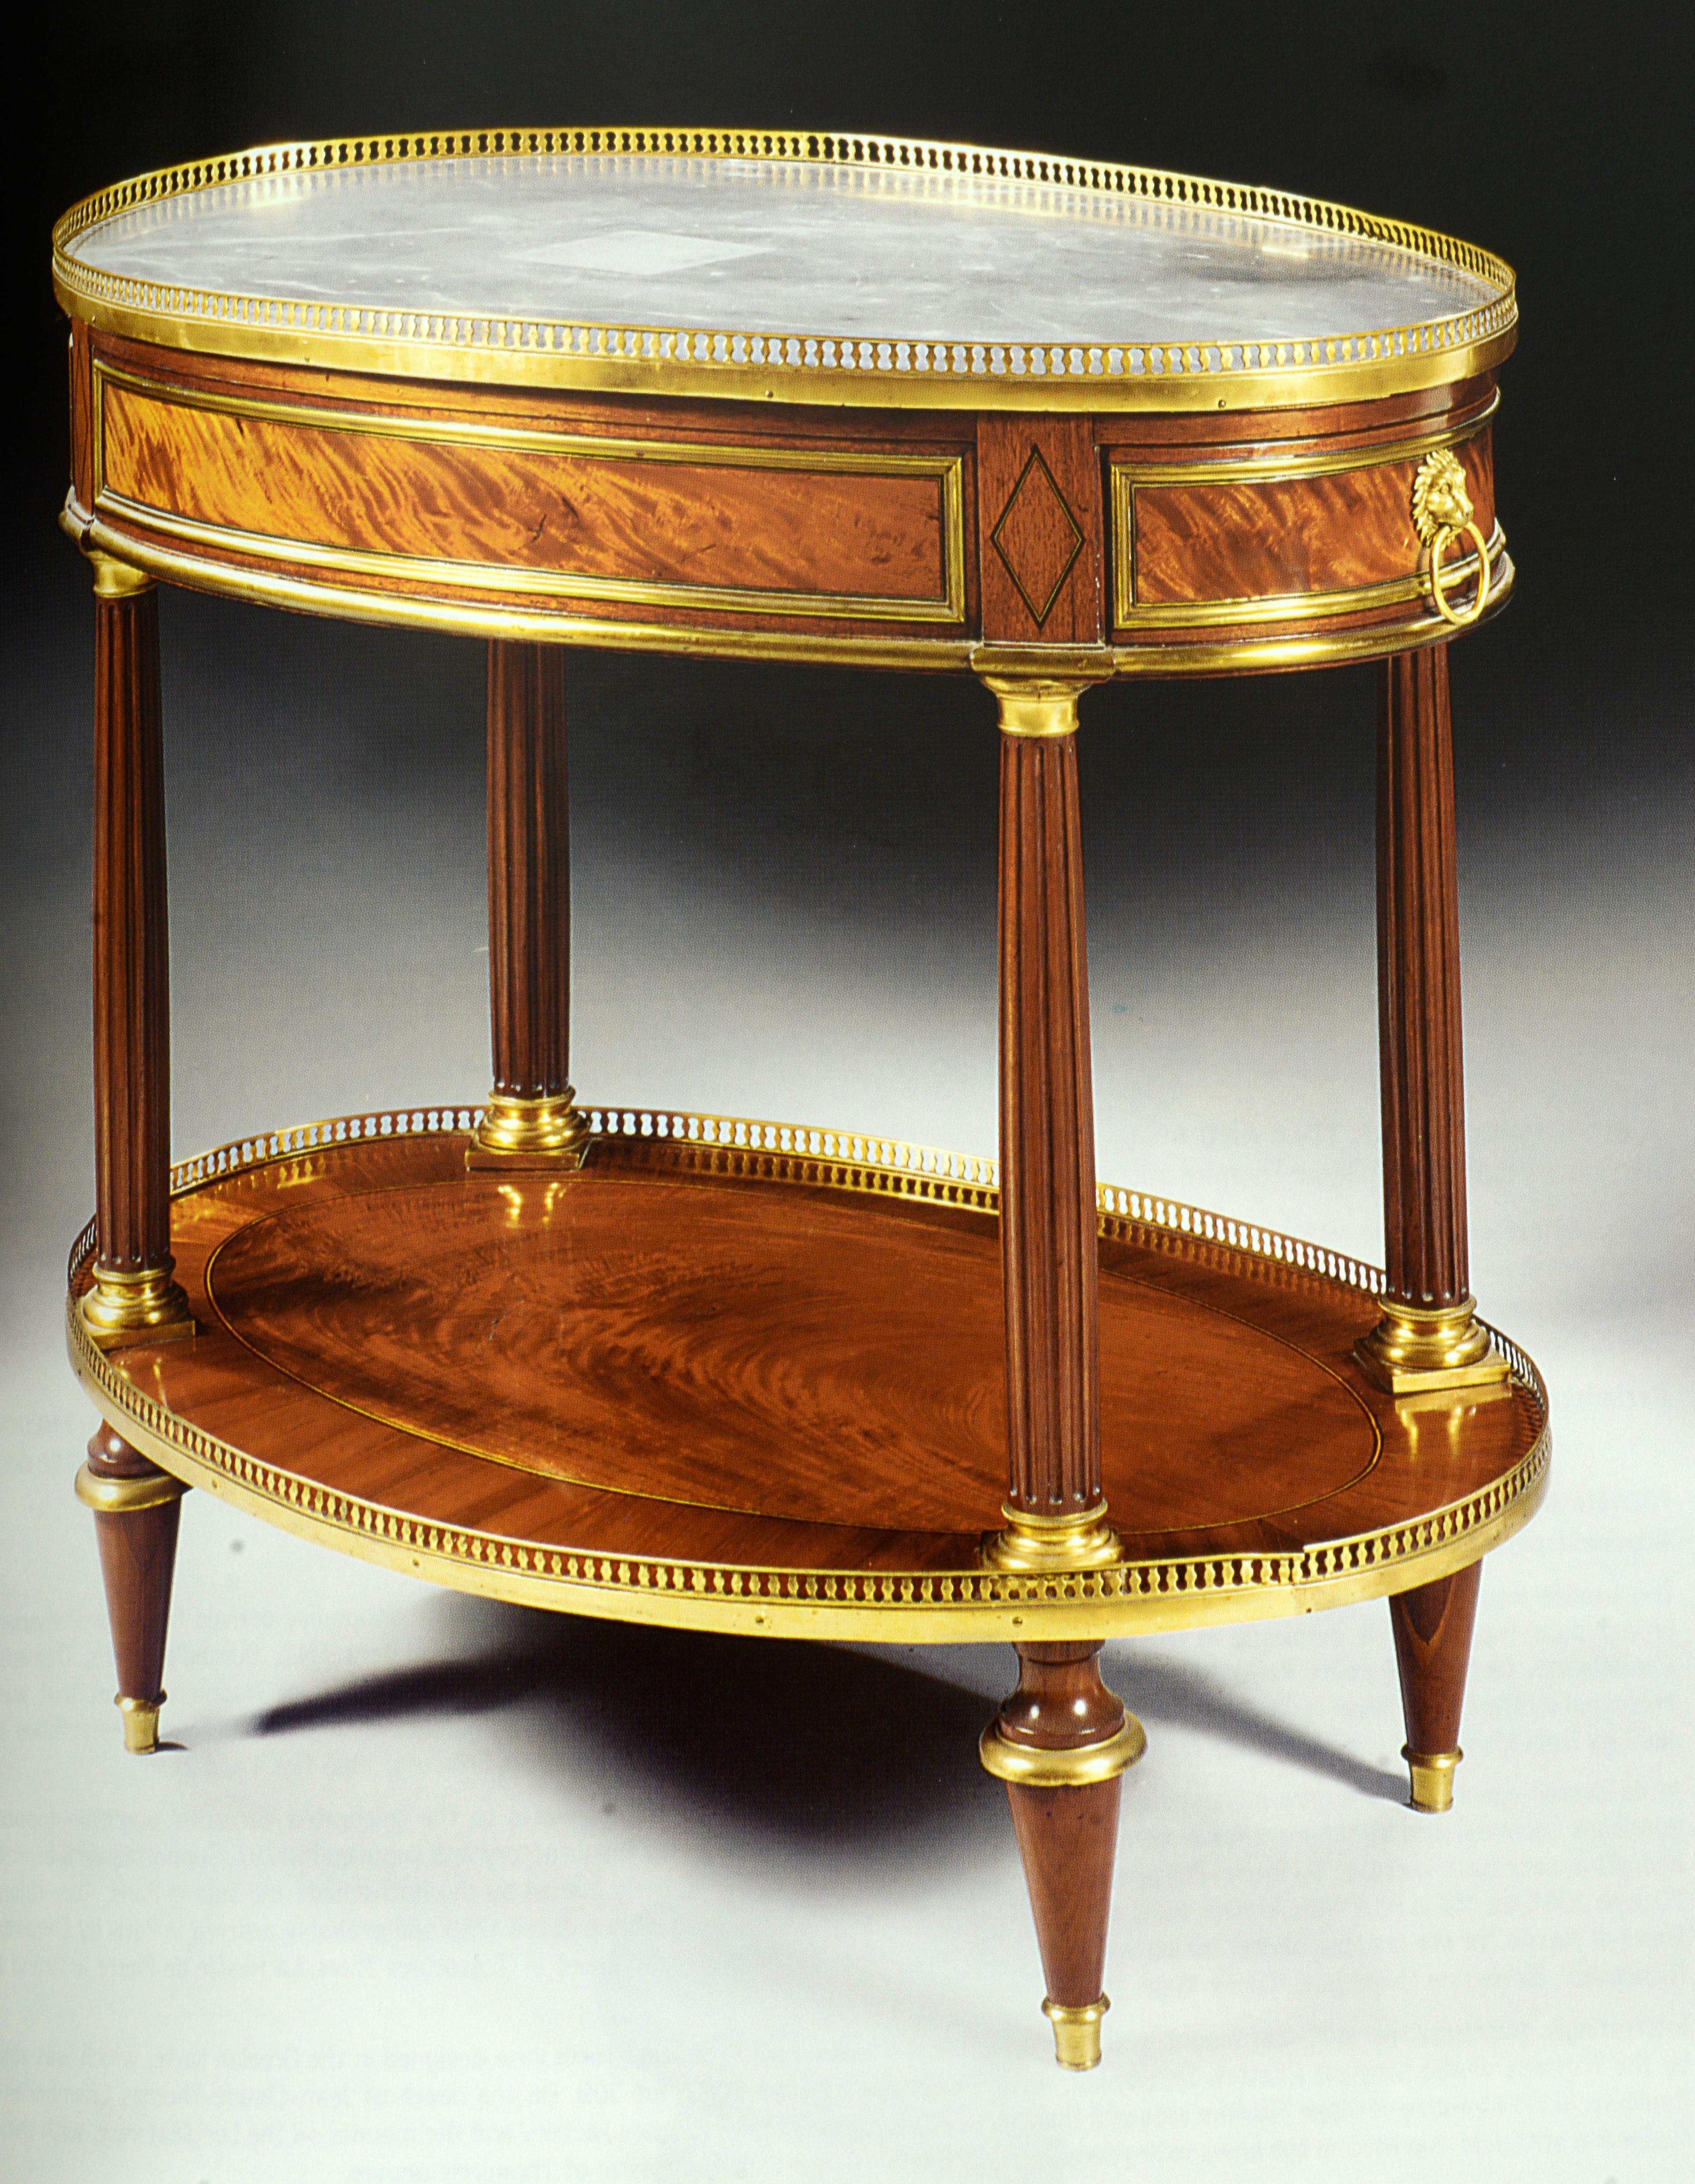 Paper Boulle to Jansen, an Important European Private Collection, June 2003 For Sale